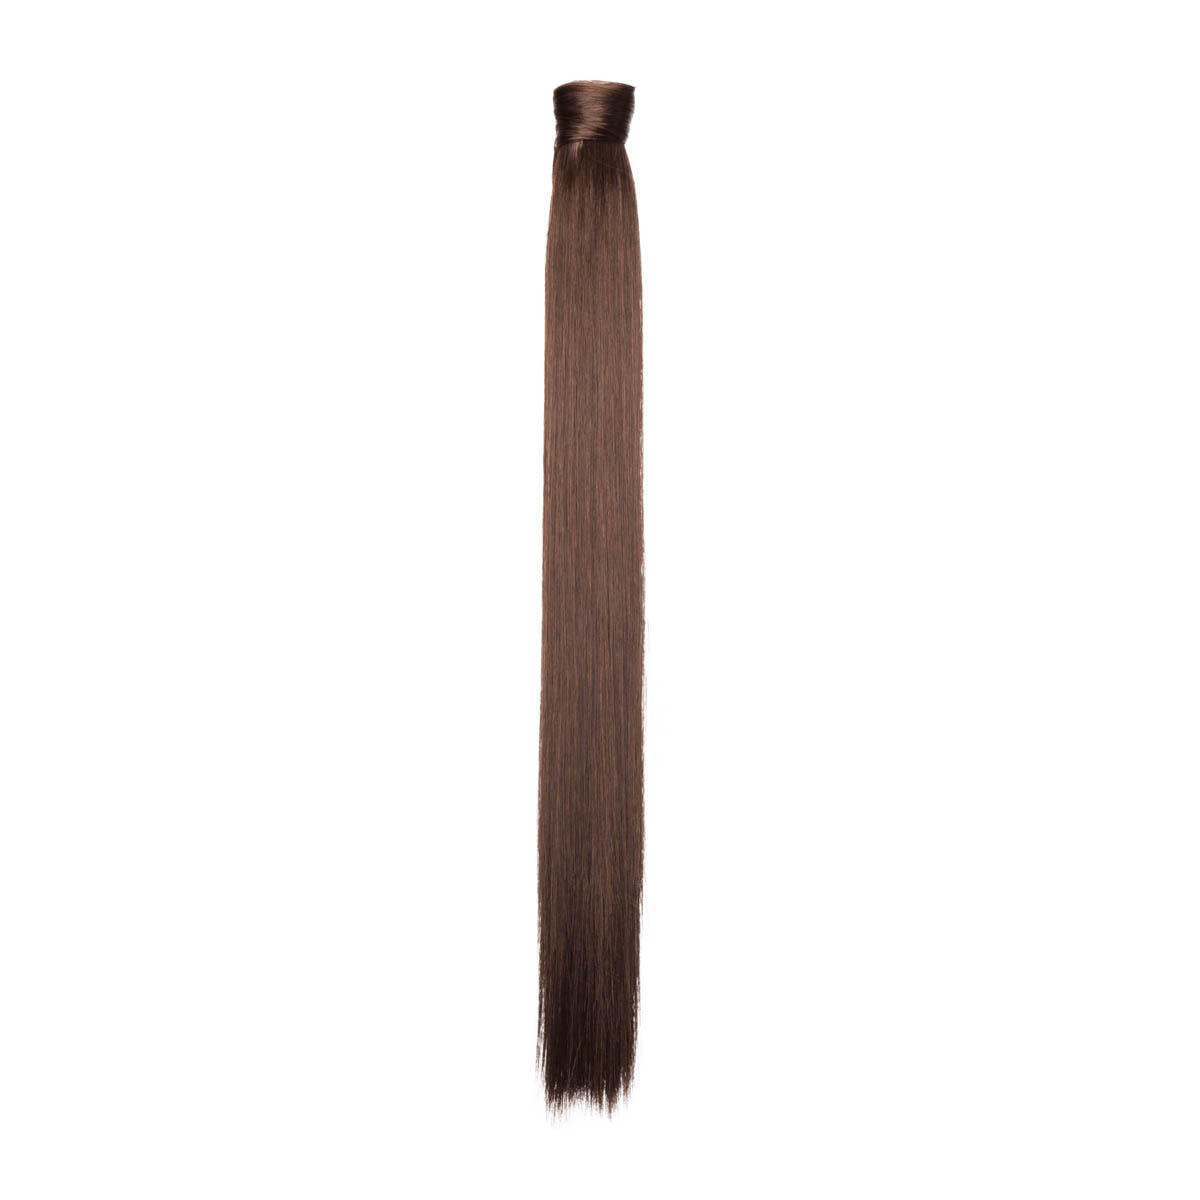 Clip-in Ponytail 2.3 Chocolate Brown 50 cm